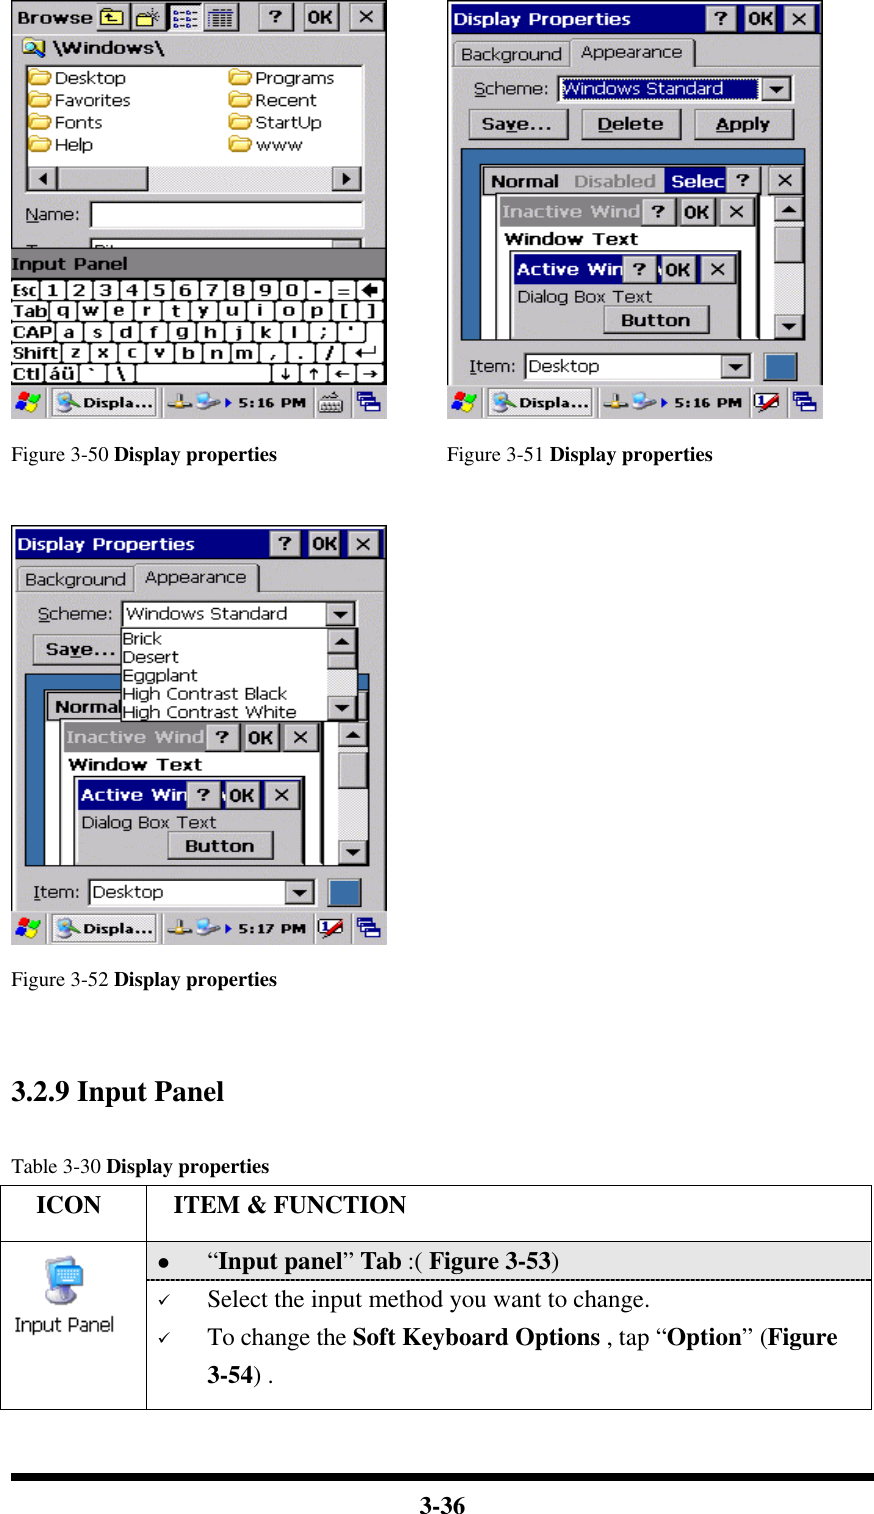  3-36    Figure 3-50 Display properties Figure 3-51 Display properties      Figure 3-52 Display properties    3.2.9 Input Panel  Table 3-30 Display properties   ICON  ITEM &amp; FUNCTION l “Input panel” Tab :( Figure 3-53)    ü Select the input method you want to change. ü To change the Soft Keyboard Options , tap “Option” (Figure 3-54) . 